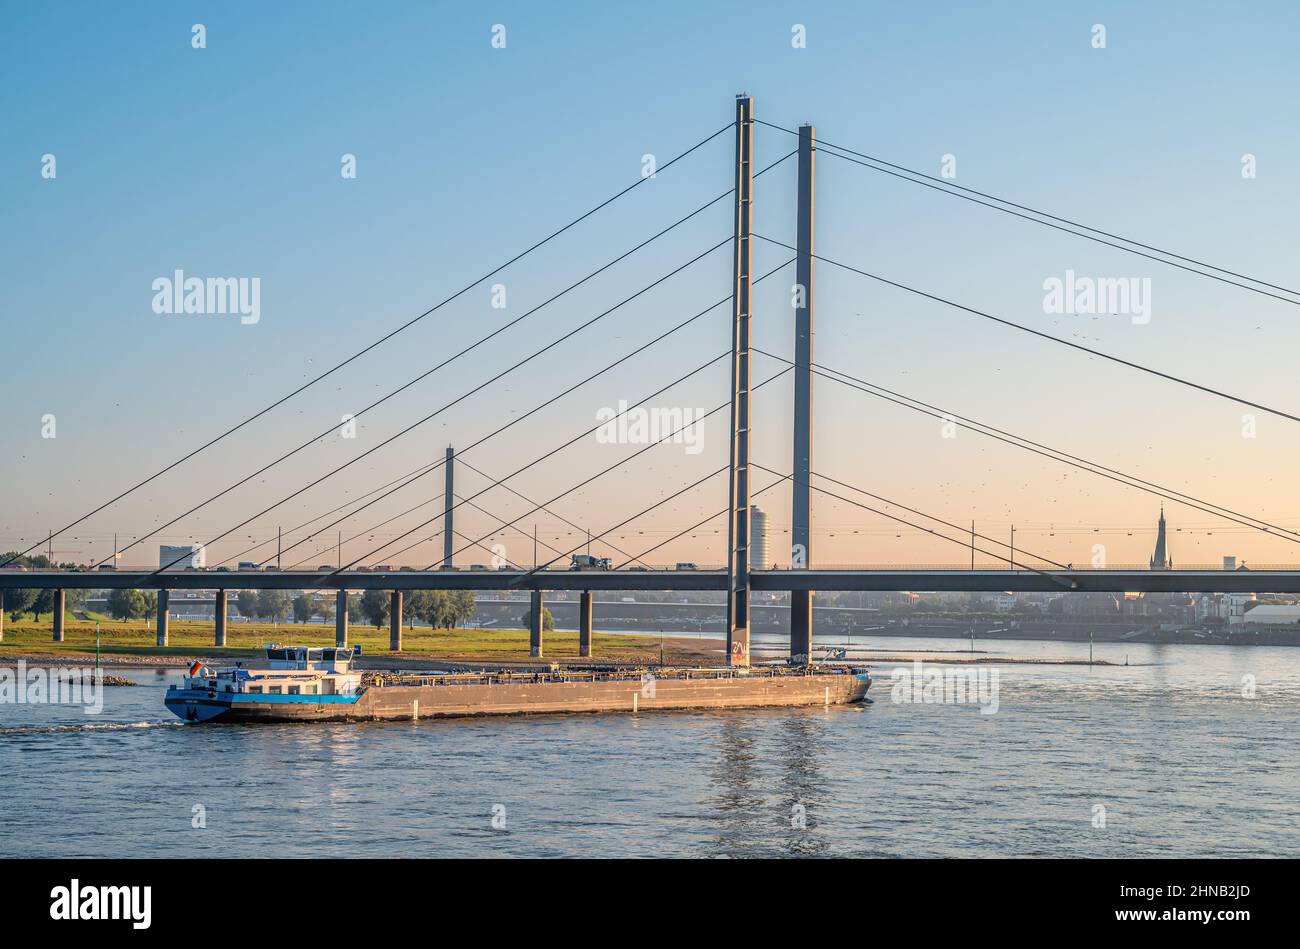 Inland vessel in front of the Duesseldorf Rhine knee bridge at dawn, NRW, Germany Stock Photo